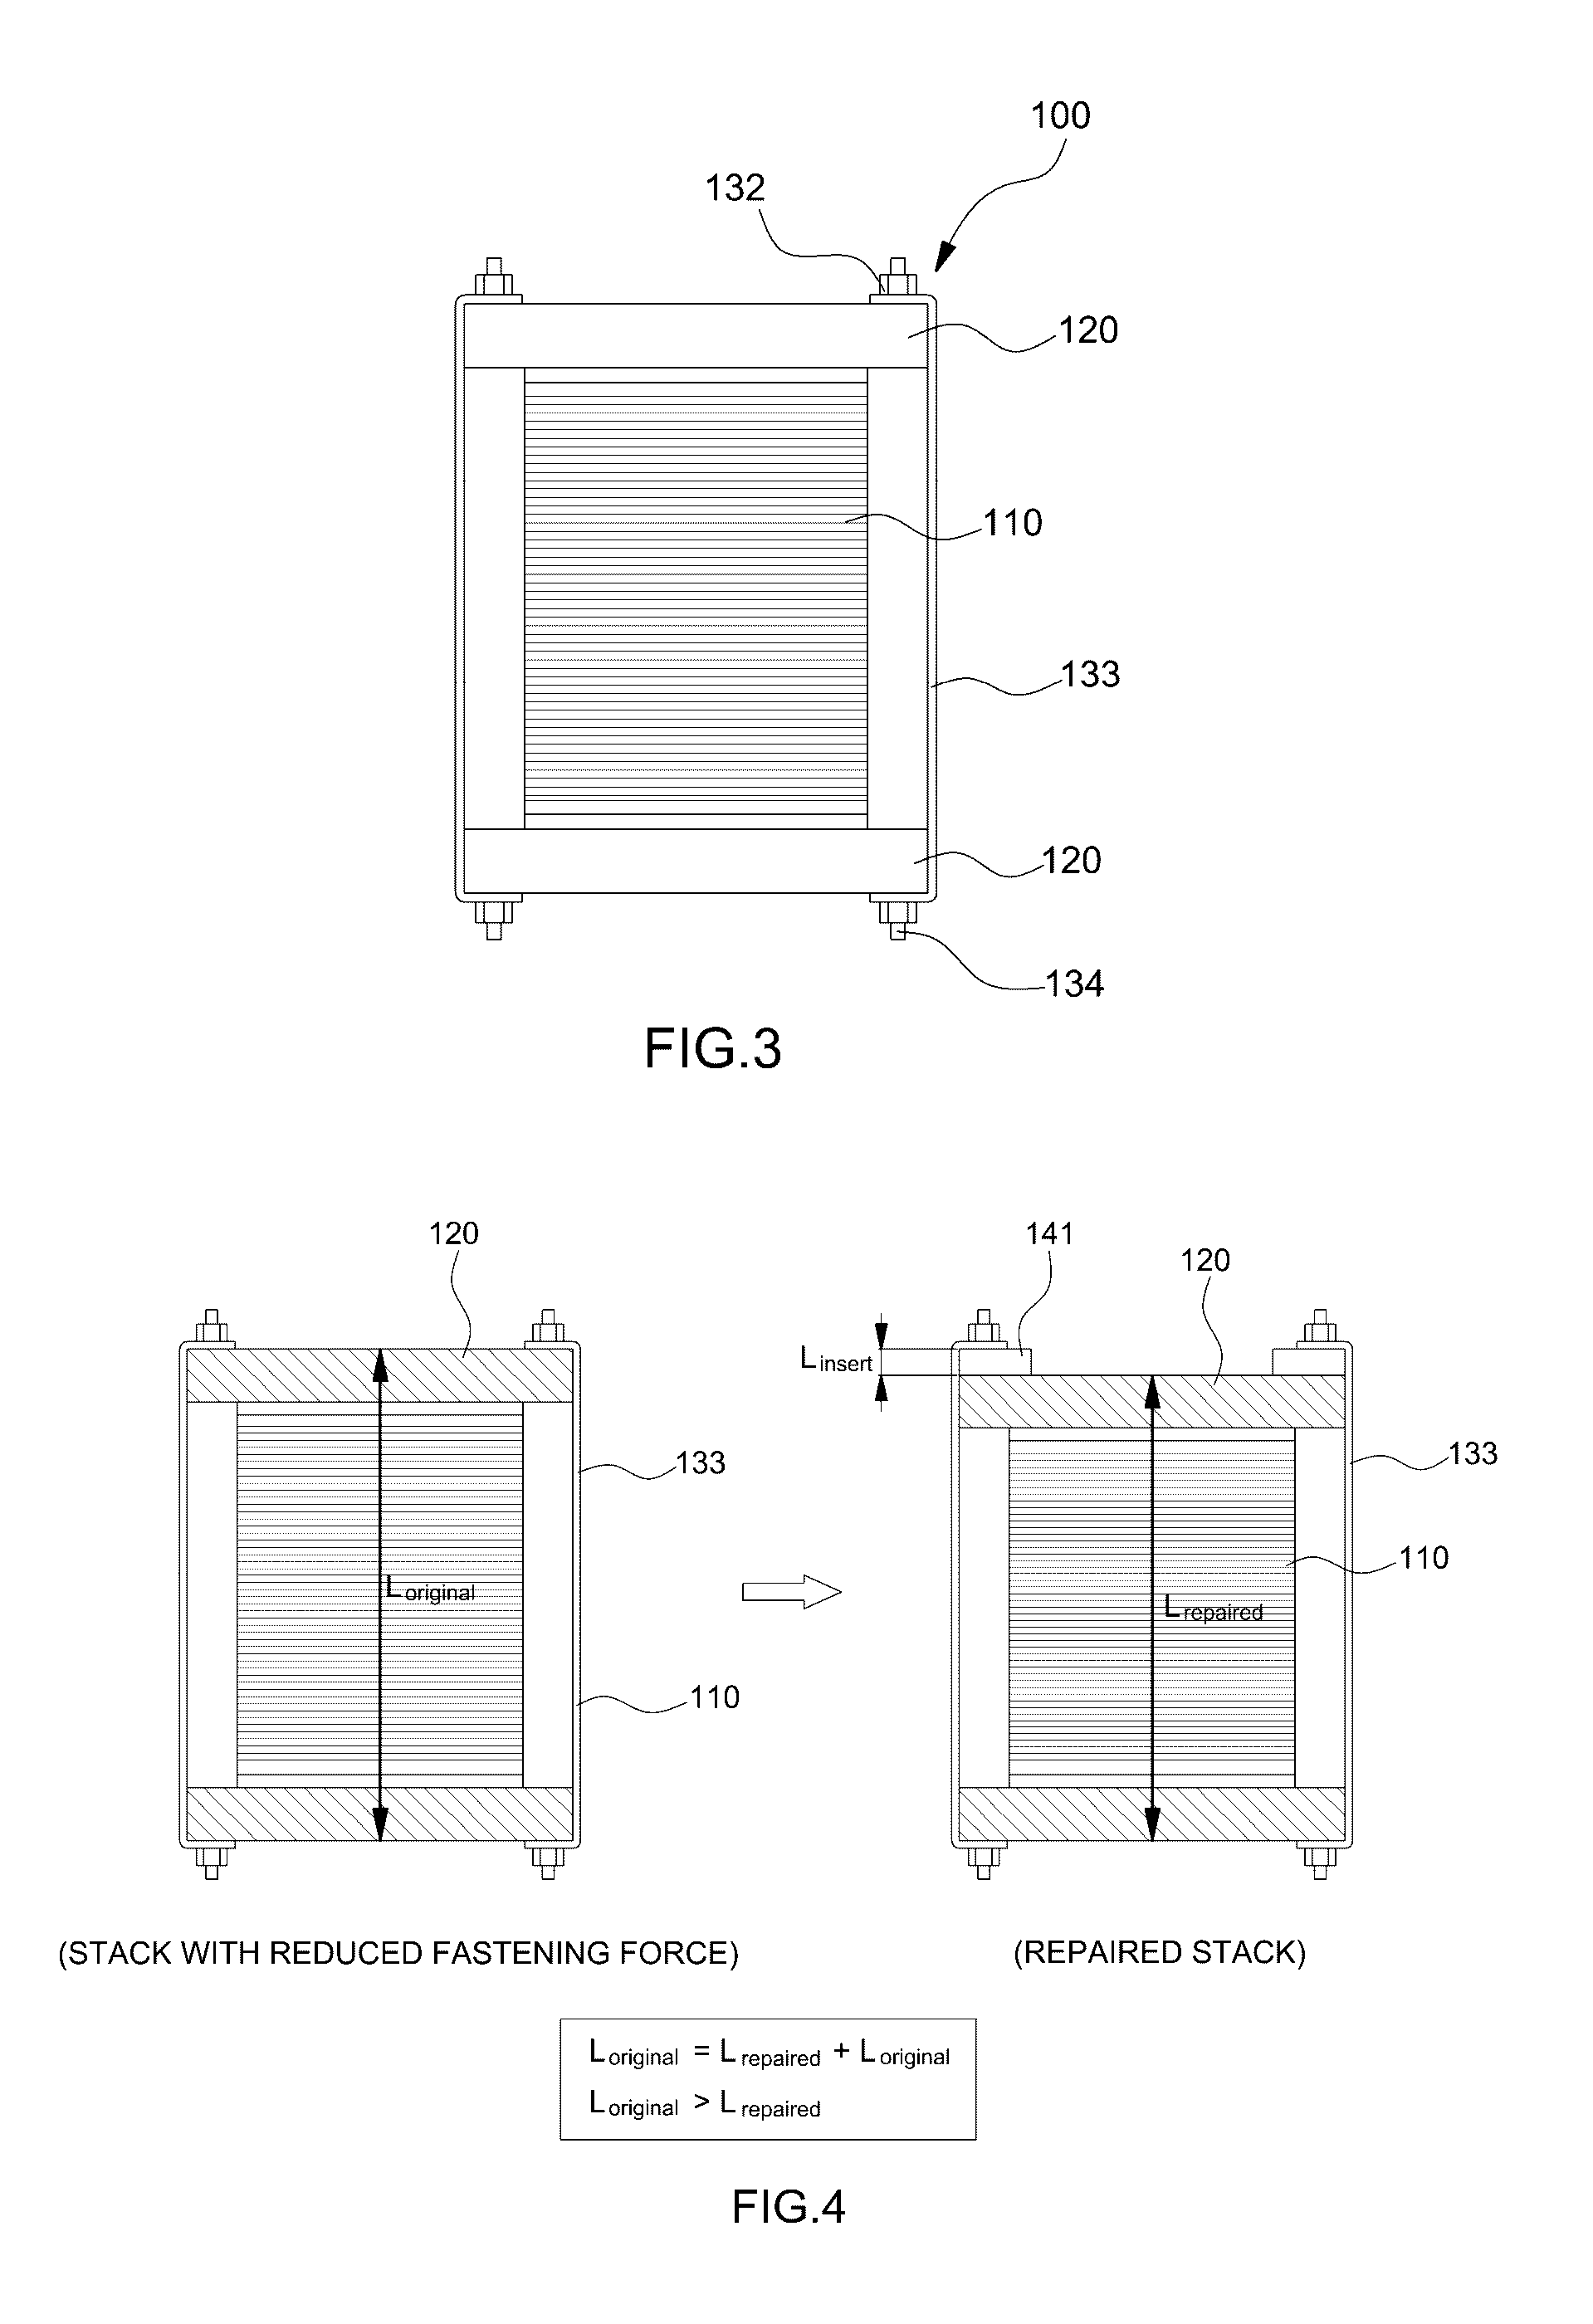 Structure for mounting fuel cell stack